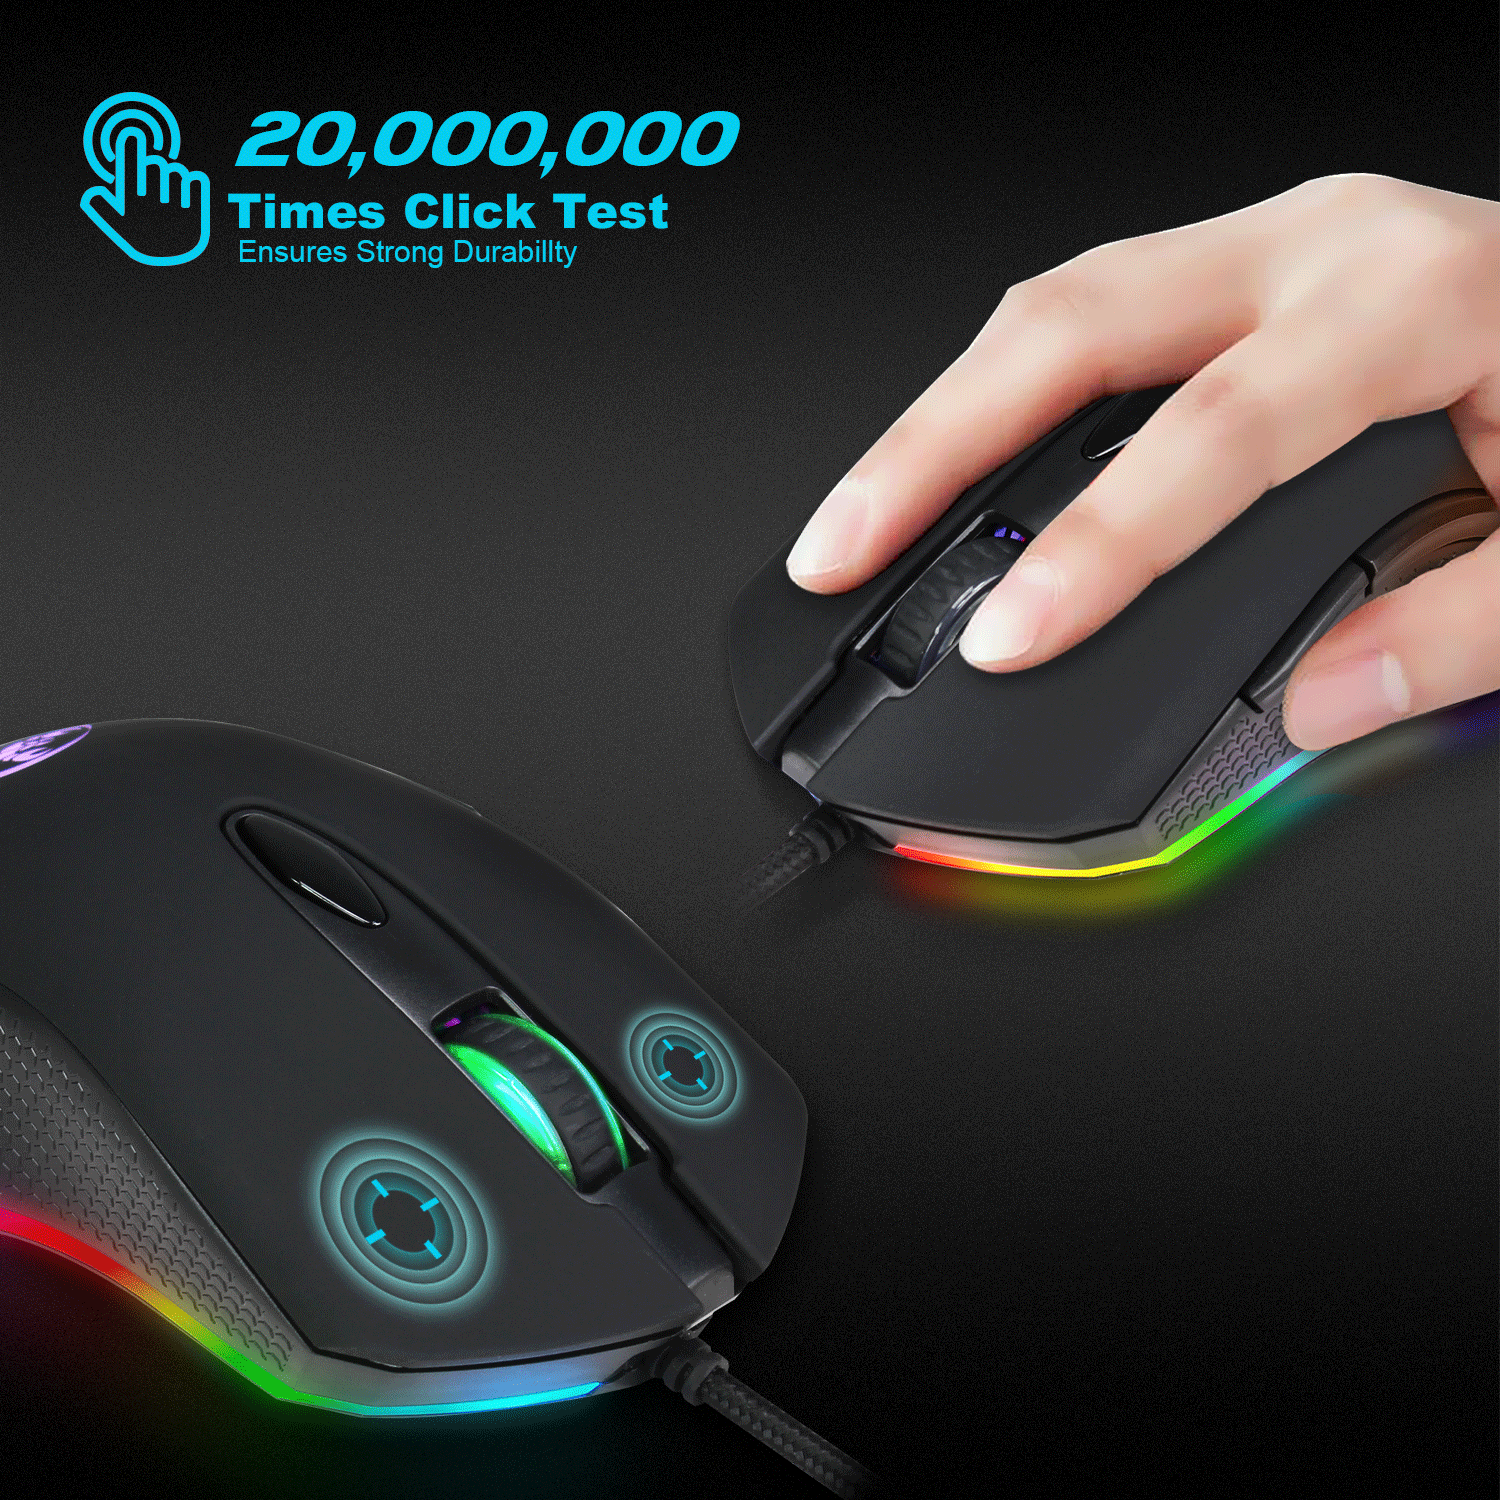 HXSJ S500 RGB Backlit Gaming Mouse 6 Buttons 4800DPI Optical USB Wired Mice Macros Define 54